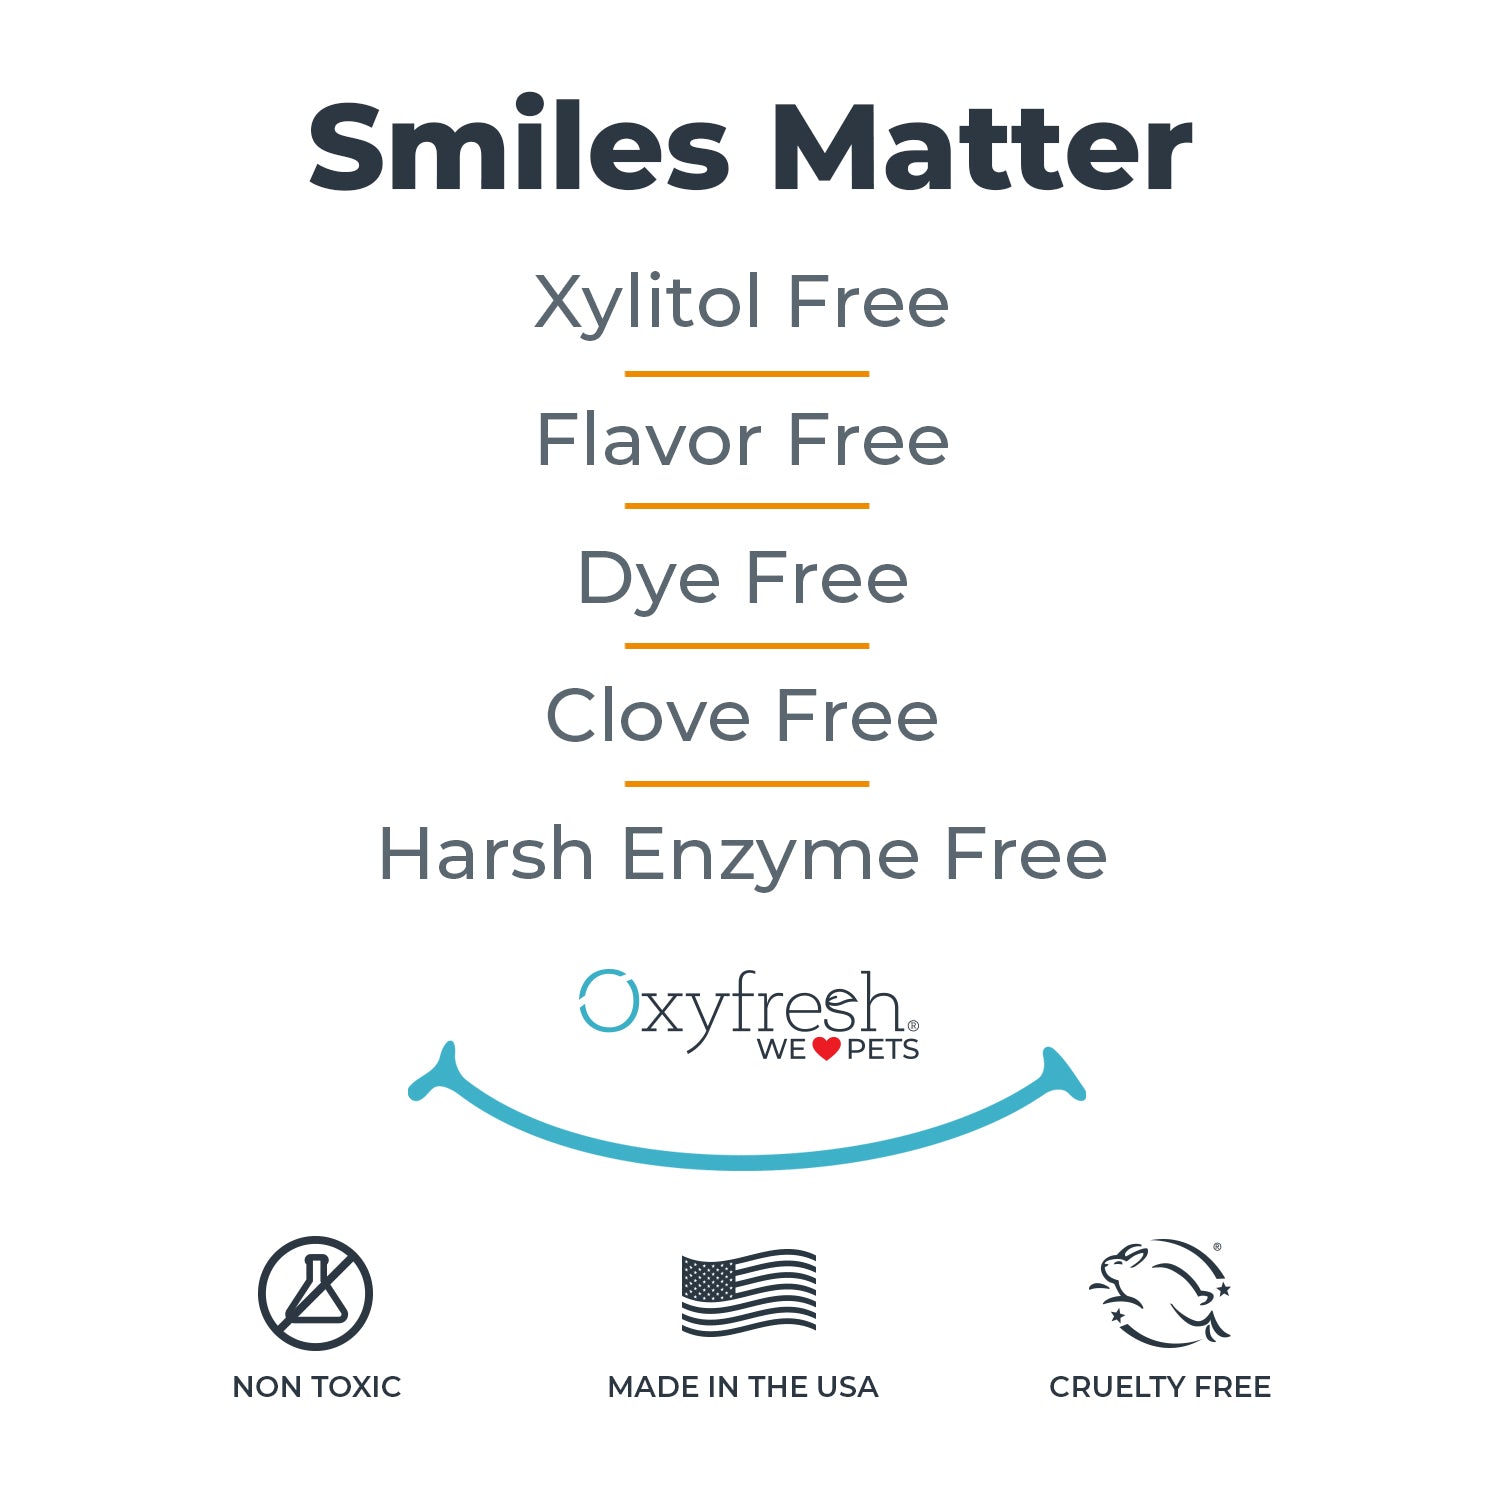 oxyfresh pet dental gel toothpaste graphic that says "Smiles matter - xylitol free - flavor free - dye free - clove free - harsh enzyme free - non-toxic - made in the usa - cruelty free"